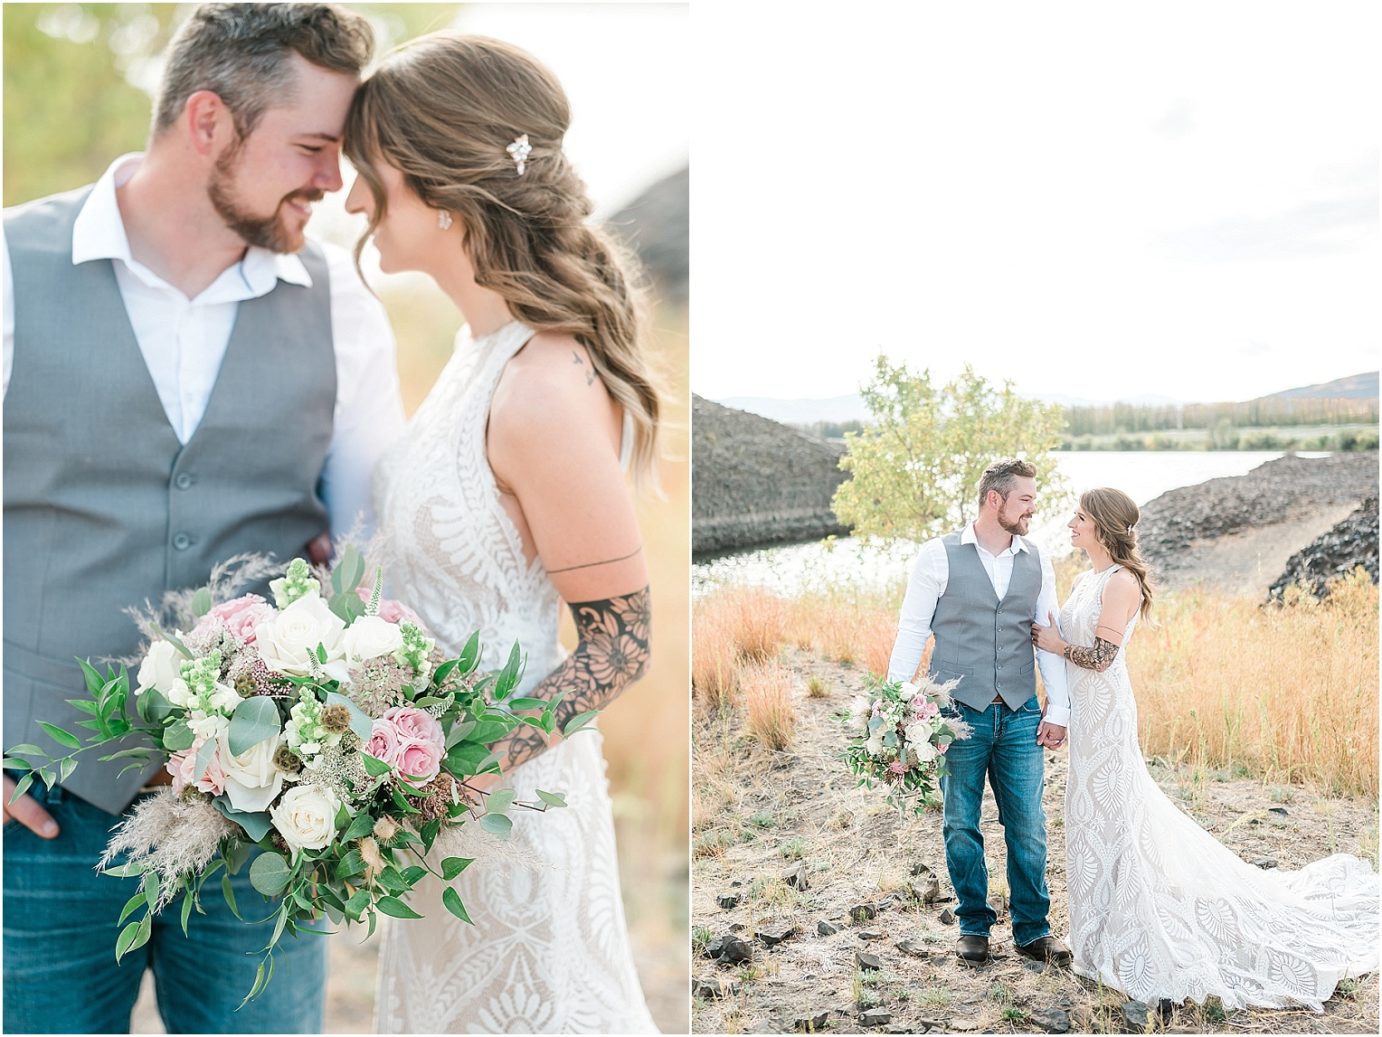 Eastern Washington Elopement Photographer Mike and Carley standing by the river